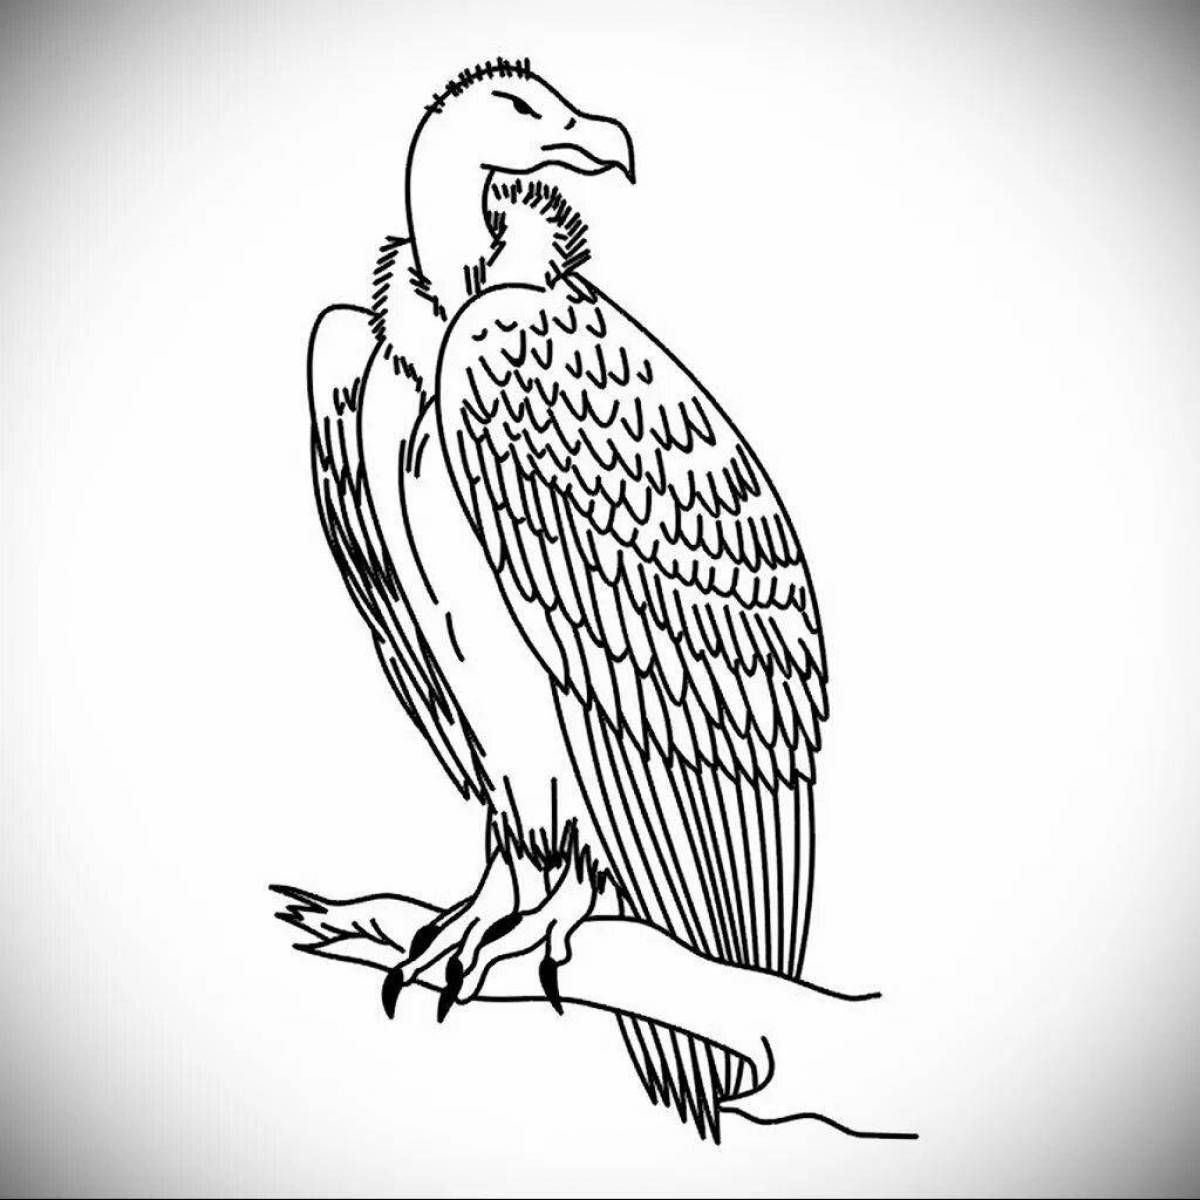 Coloring book shining vulture